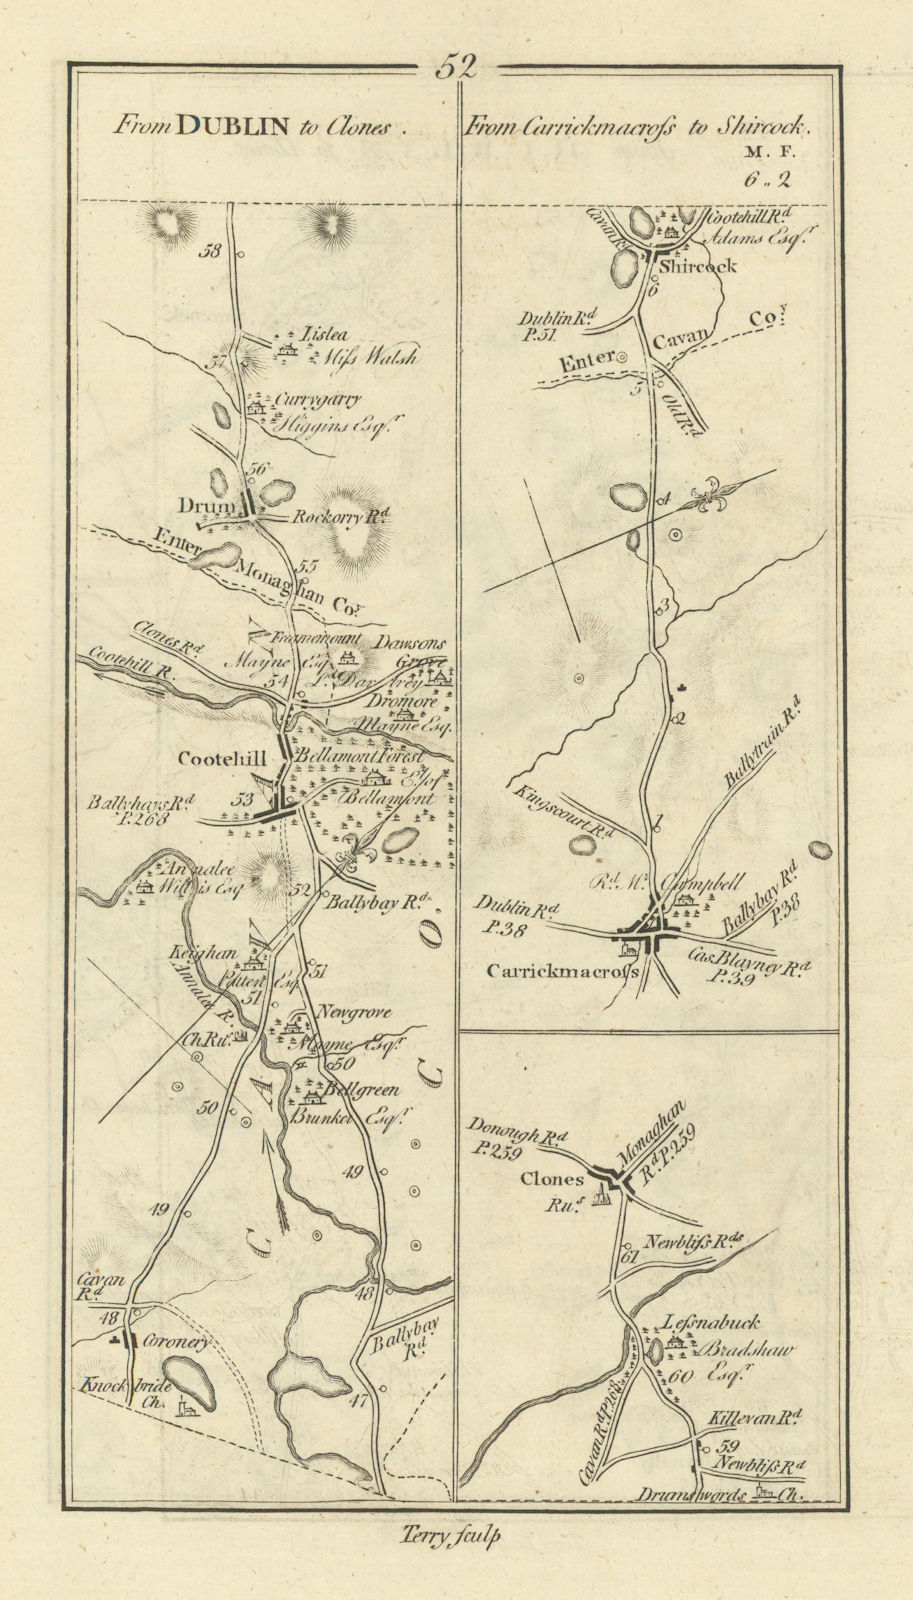 Associate Product #52 to Clones. Carrickmacross to Shercock. Cootehill. TAYLOR/SKINNER 1778 map